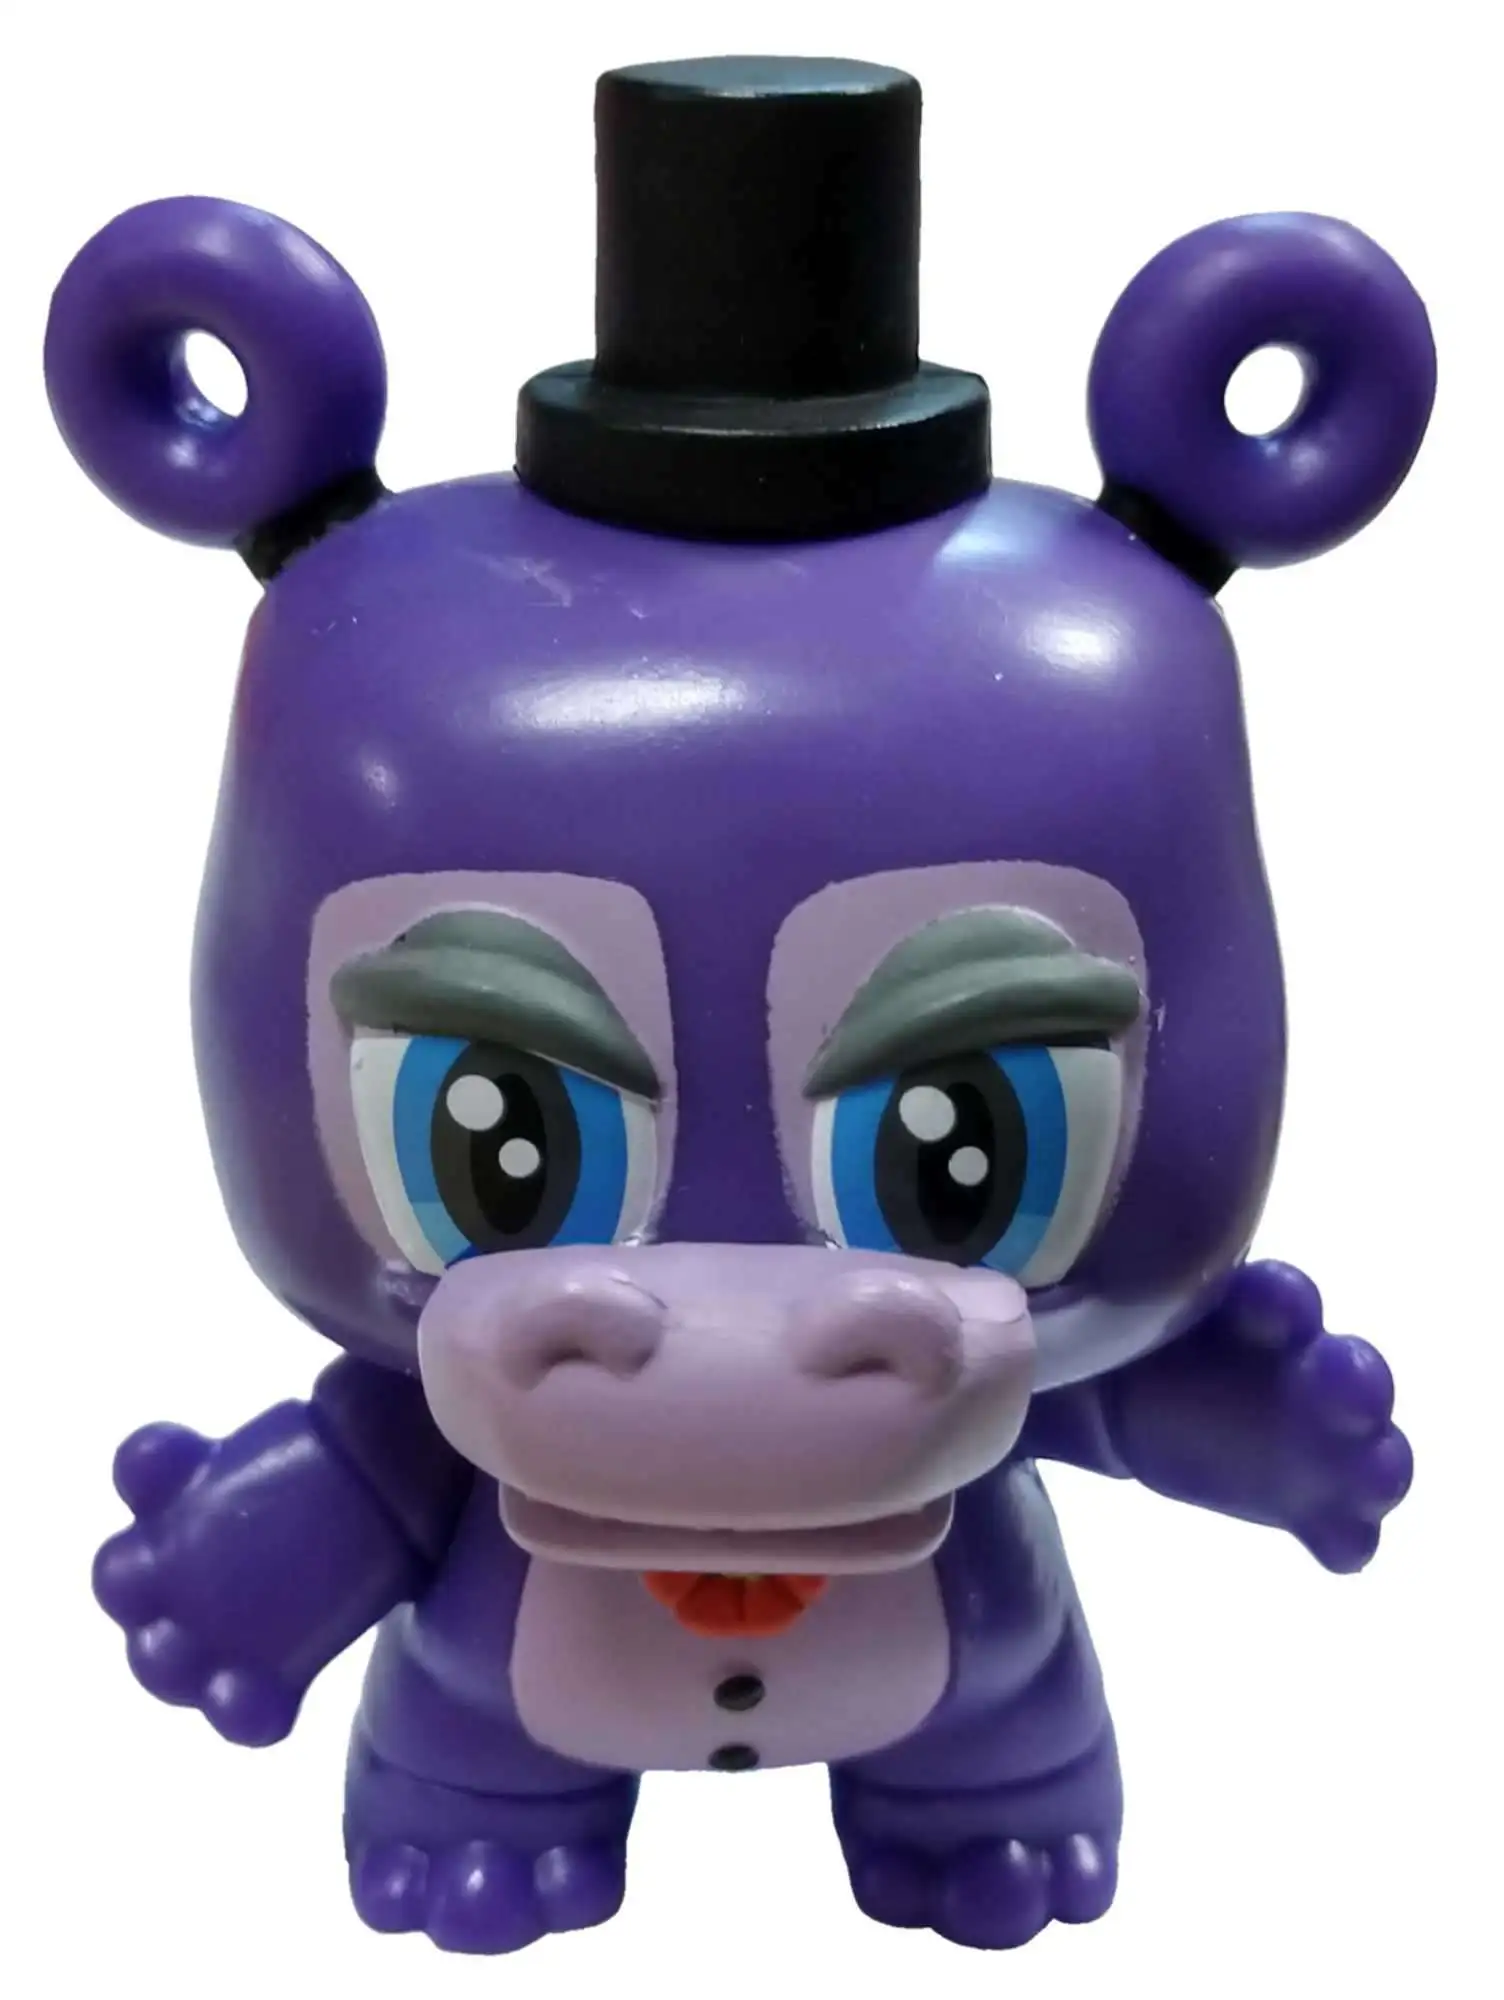 Hippo Plush NEW WITH TAGS Funko FNAF Five Nights at Freddy's Pizza Simulator Mr 